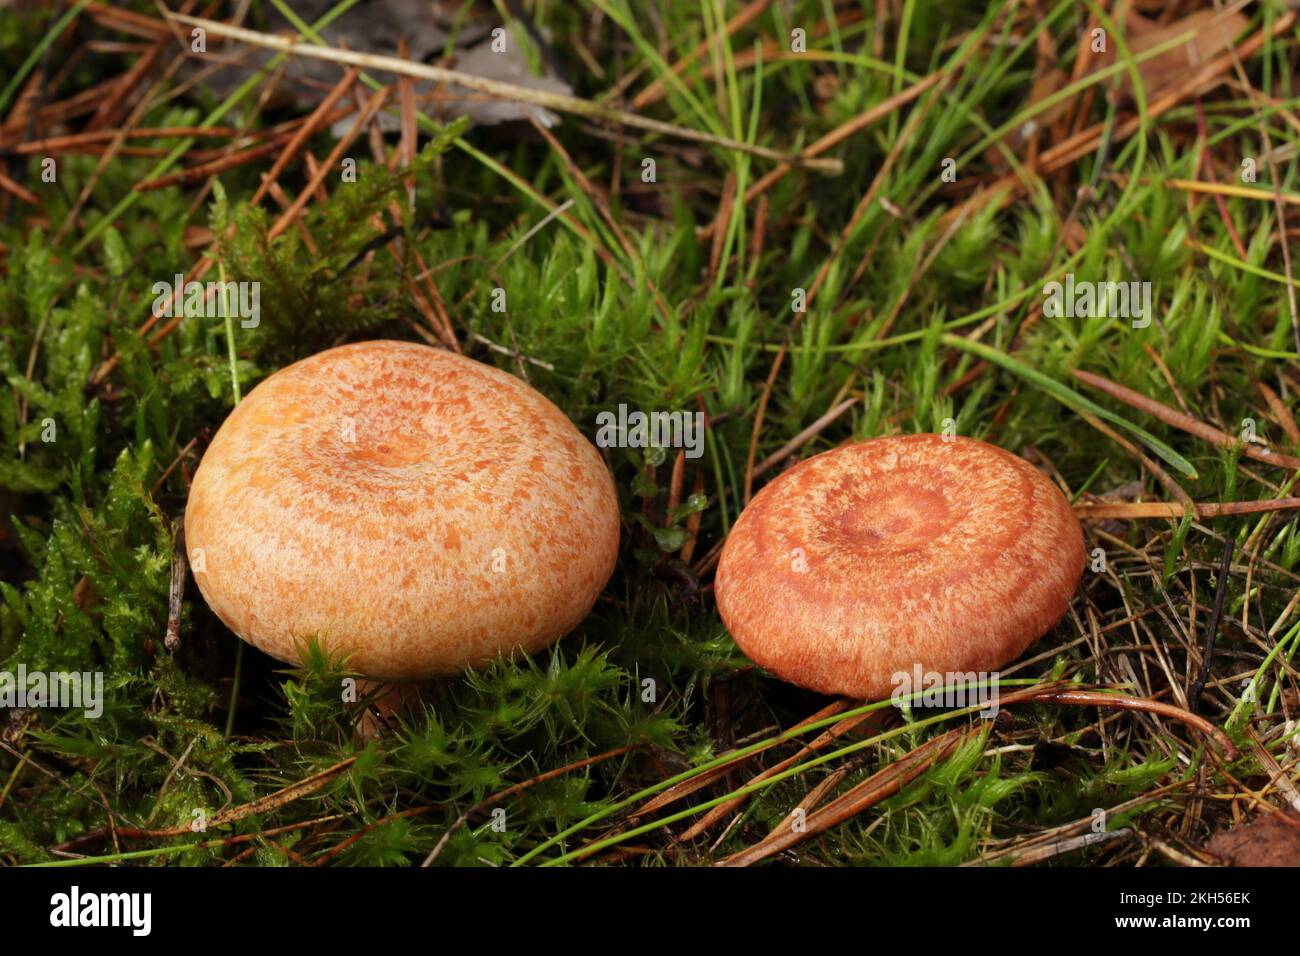 On the left is the tasty and edible mushroom saffron milk cap and on the right is the conditionally edible woolly milkcap. Stock Photo